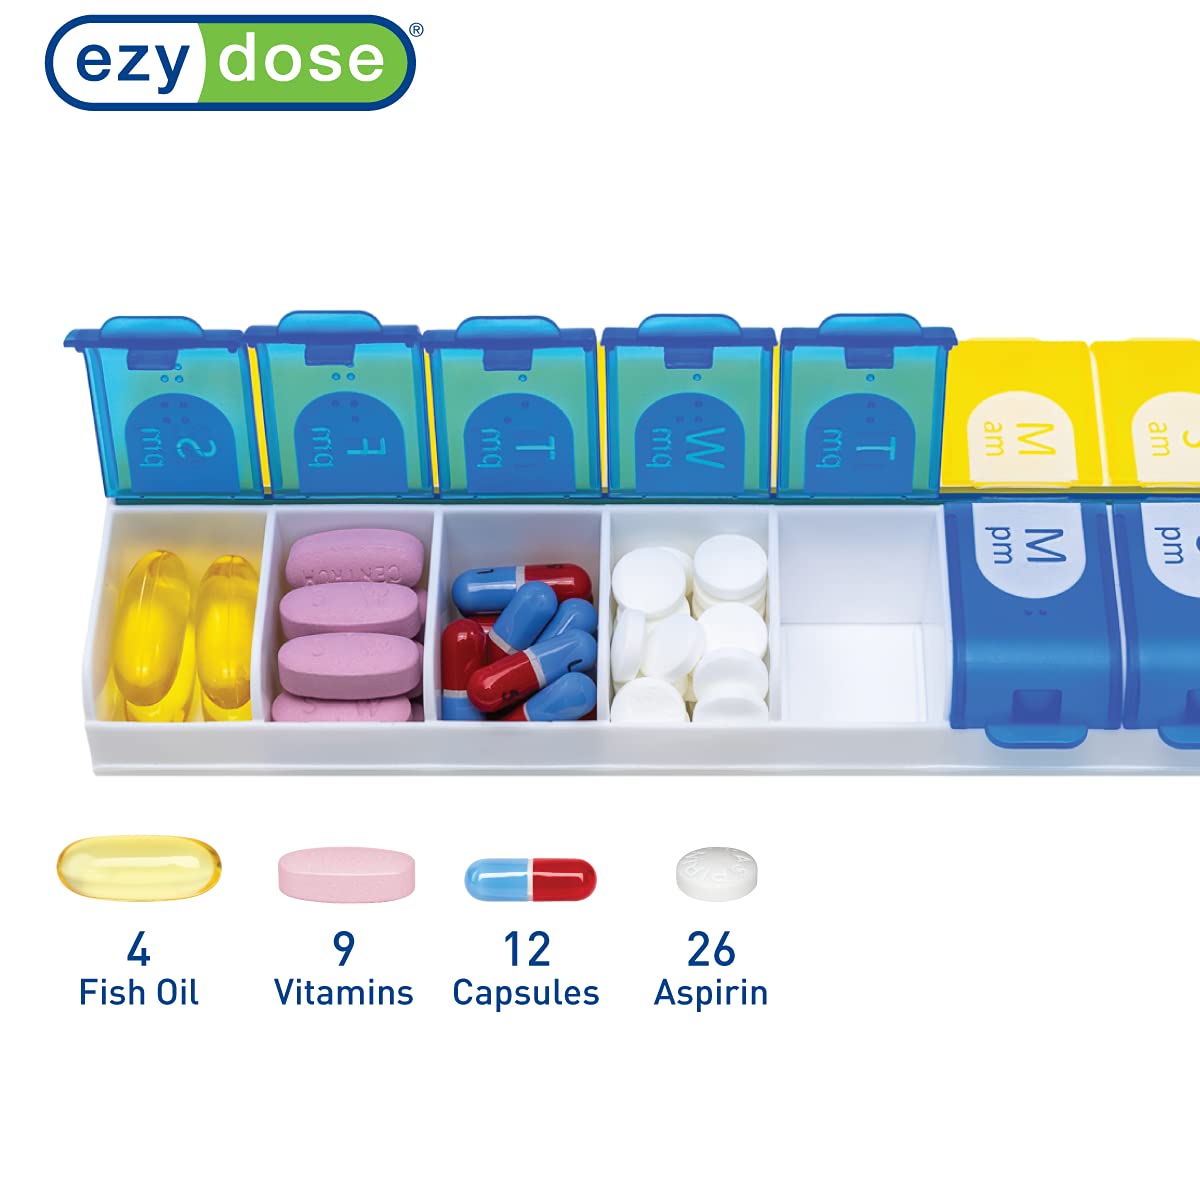 EZY DOSE Weekly (7-Day) Pill Organizer, Vitamin Case, and Medicine Box, 2 Times a Day, AM PM, Large Compartments, Easy Fill All Compartments at Once, Color May Vary